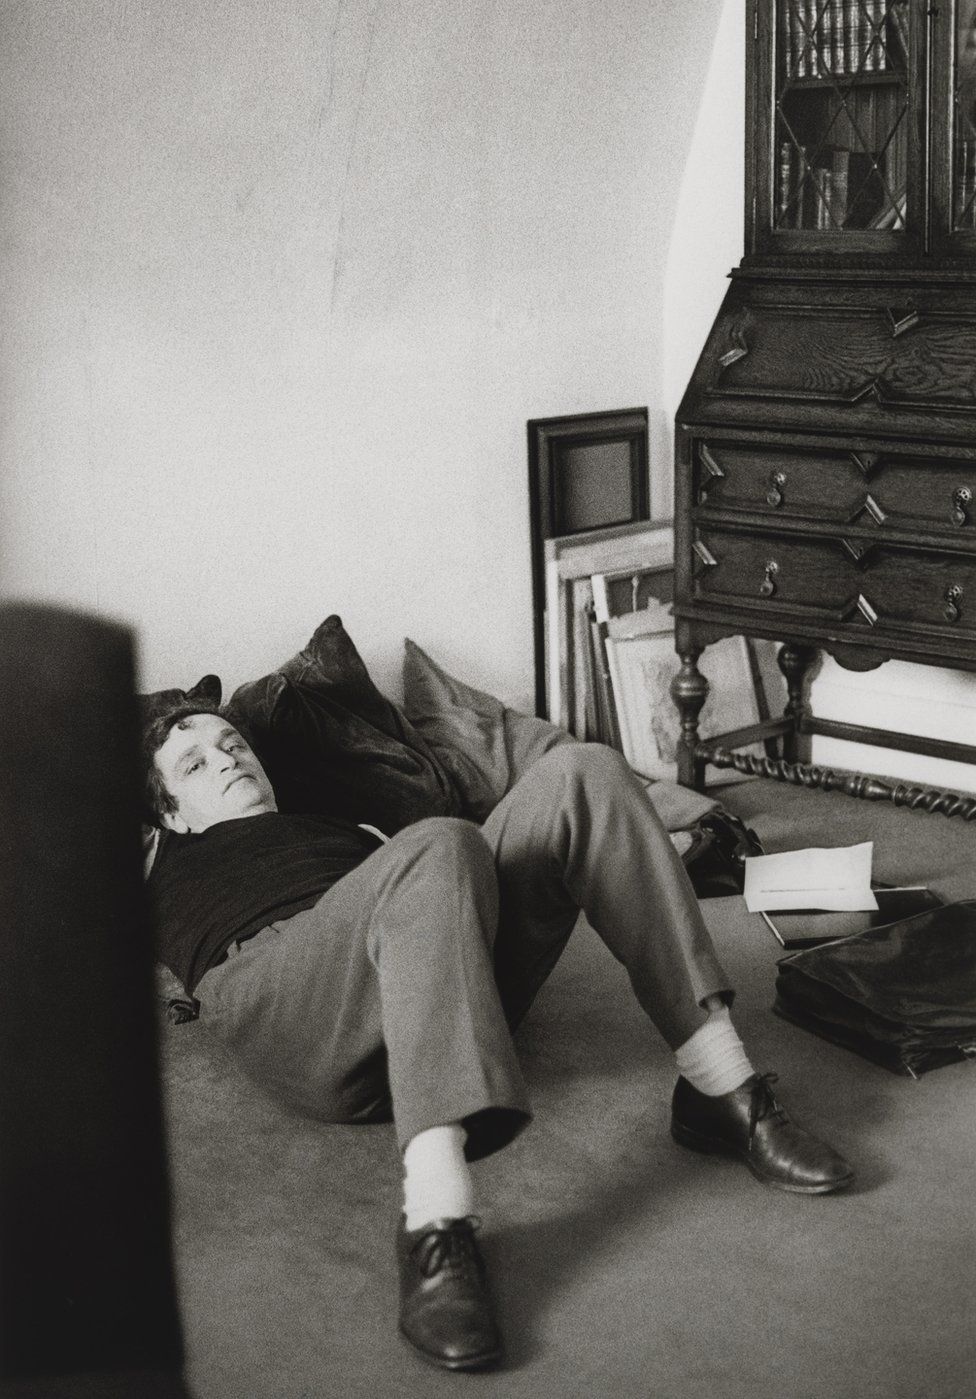 Sir Norman Rosenthal lies on the floor of his flat, 1981-1982